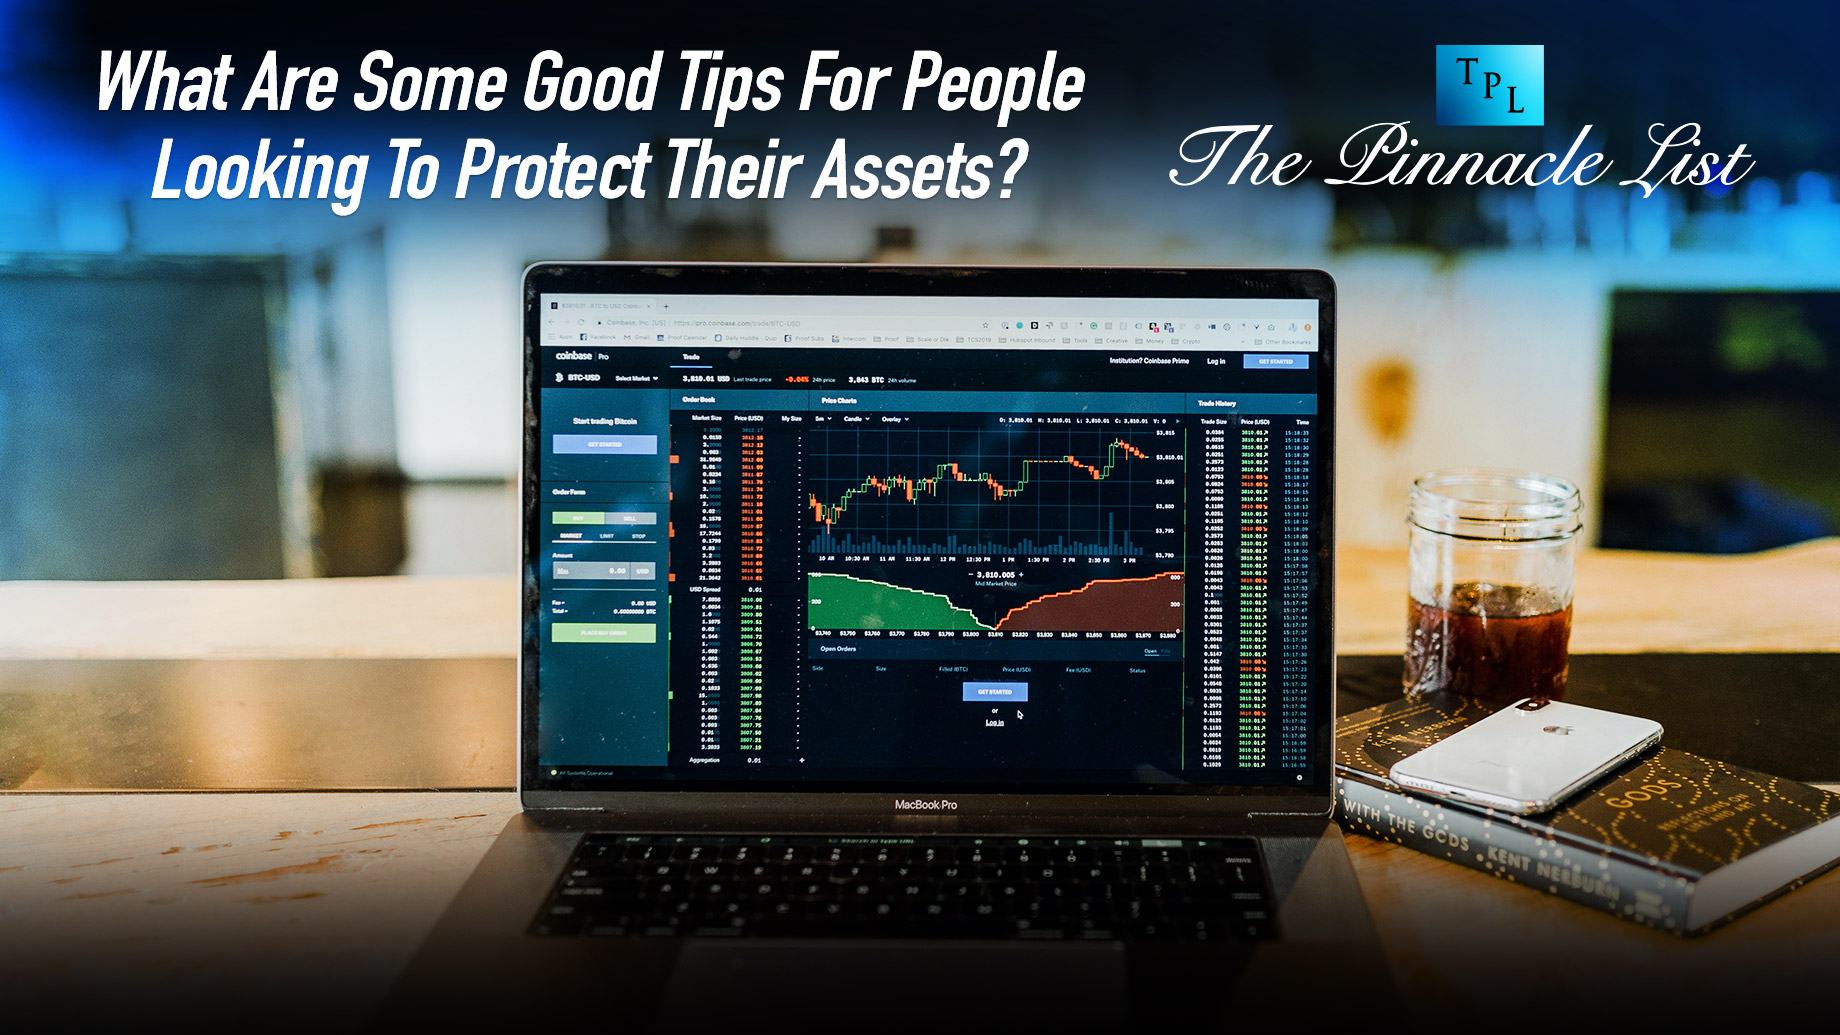 What Are Some Good Tips For People Looking To Protect Their Assets?